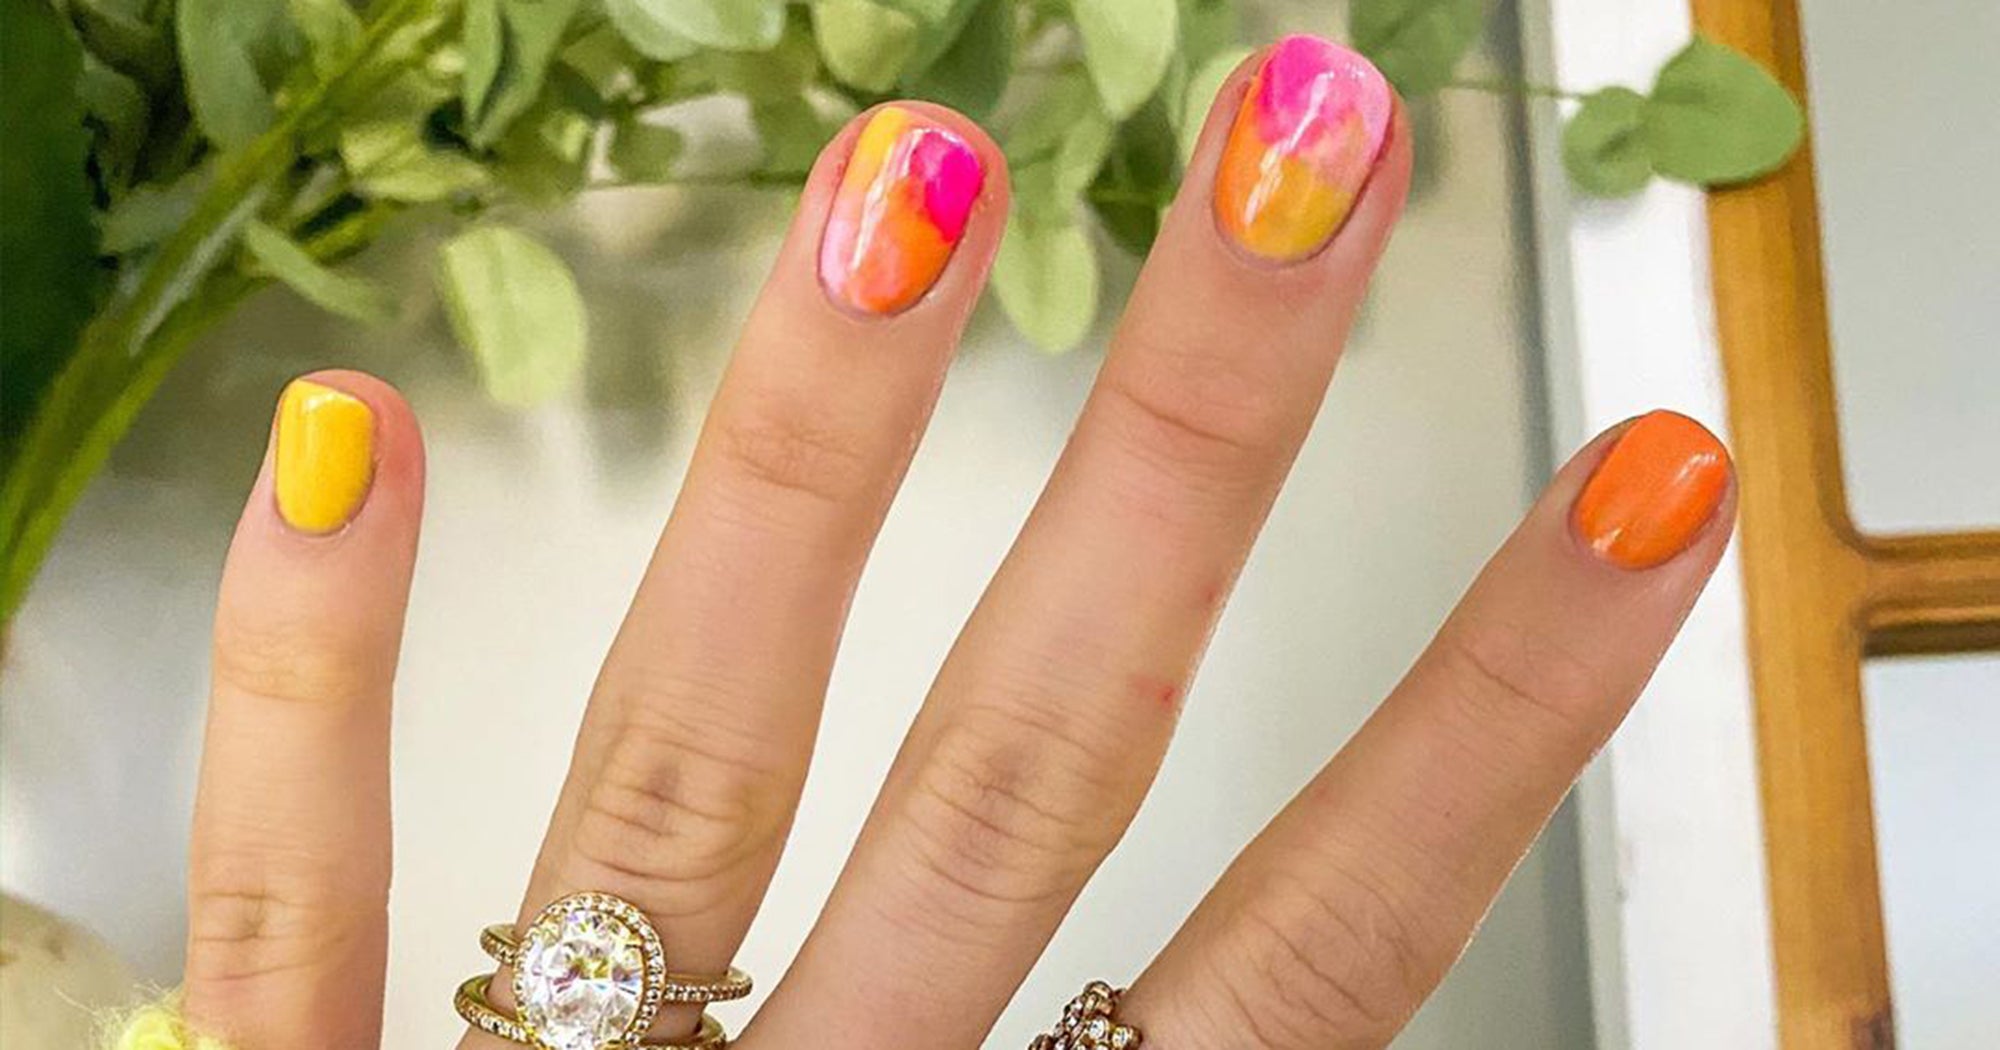 1. "10 Best Spring Break Nail Colors for a Fun and Festive Look" - wide 6